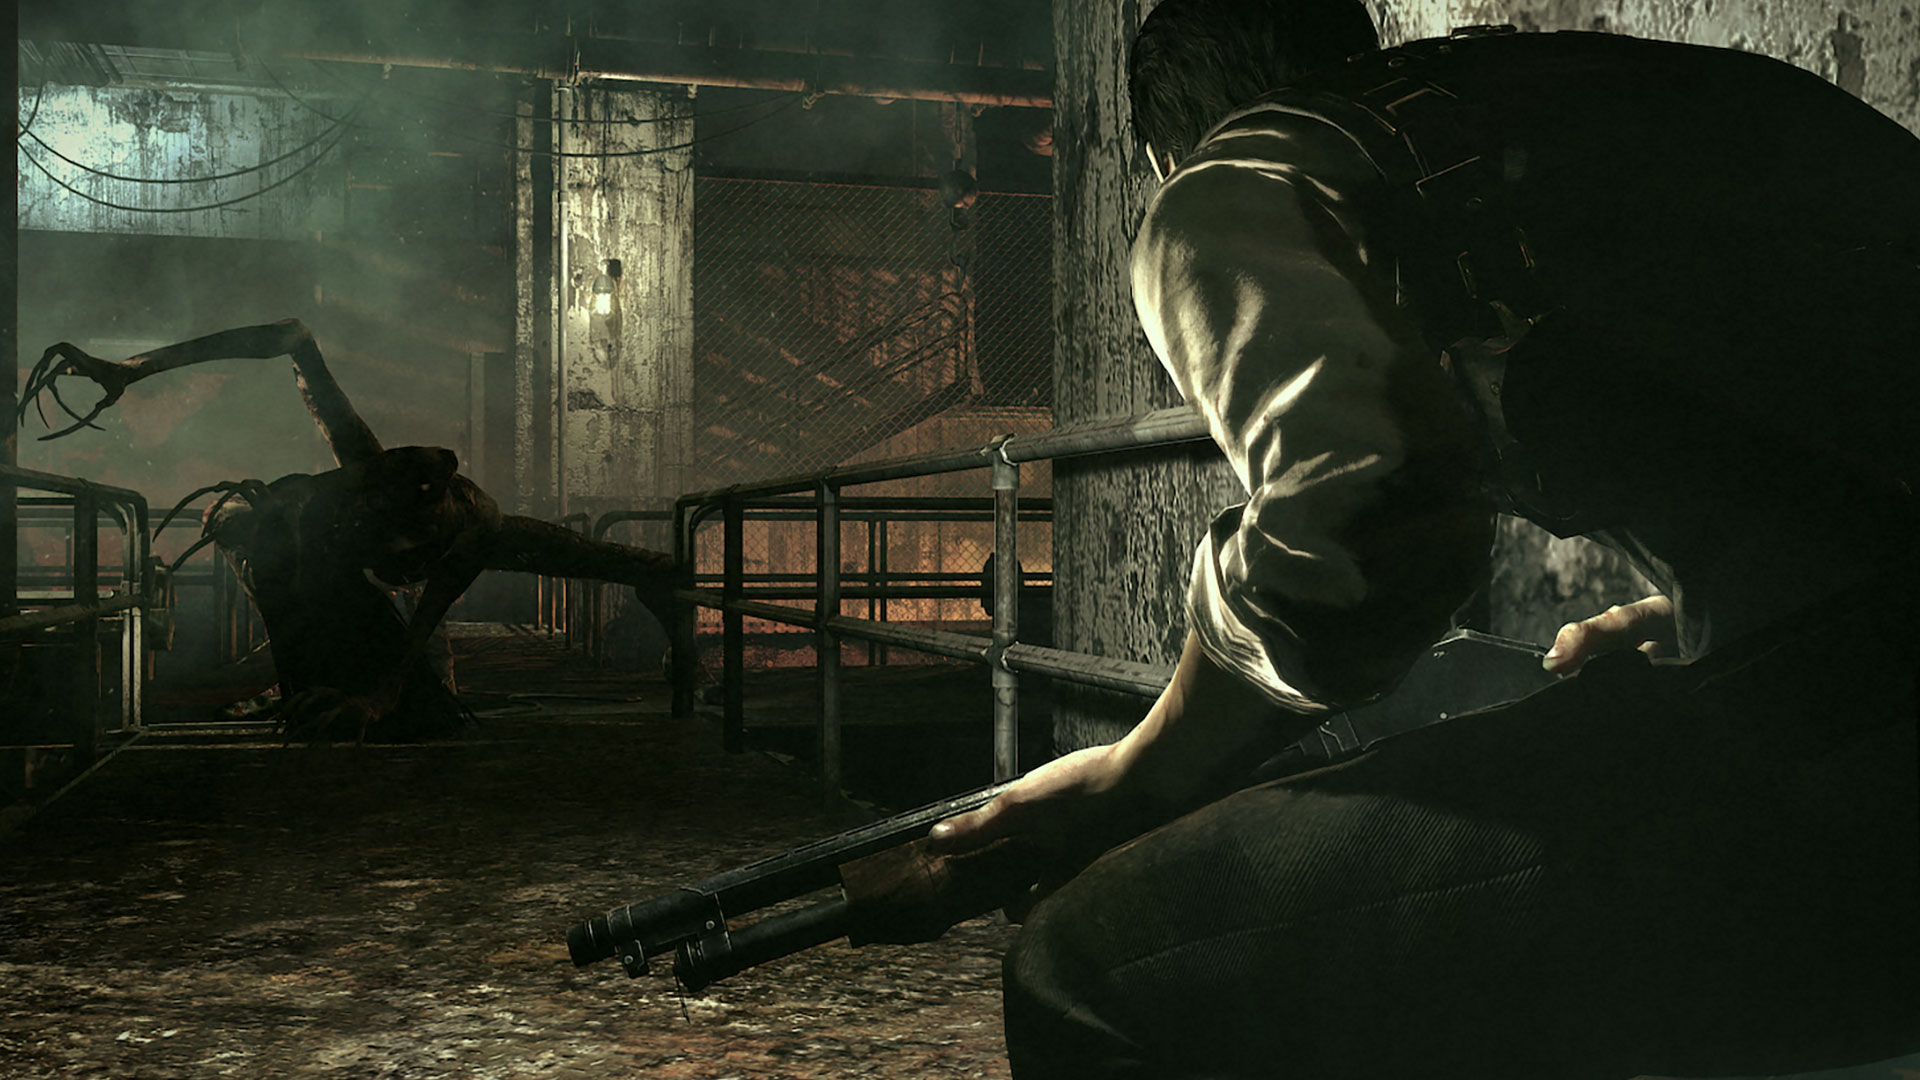 The Evil Within Full New Version Highly Compressed + Full Crack PC Game For Free Download